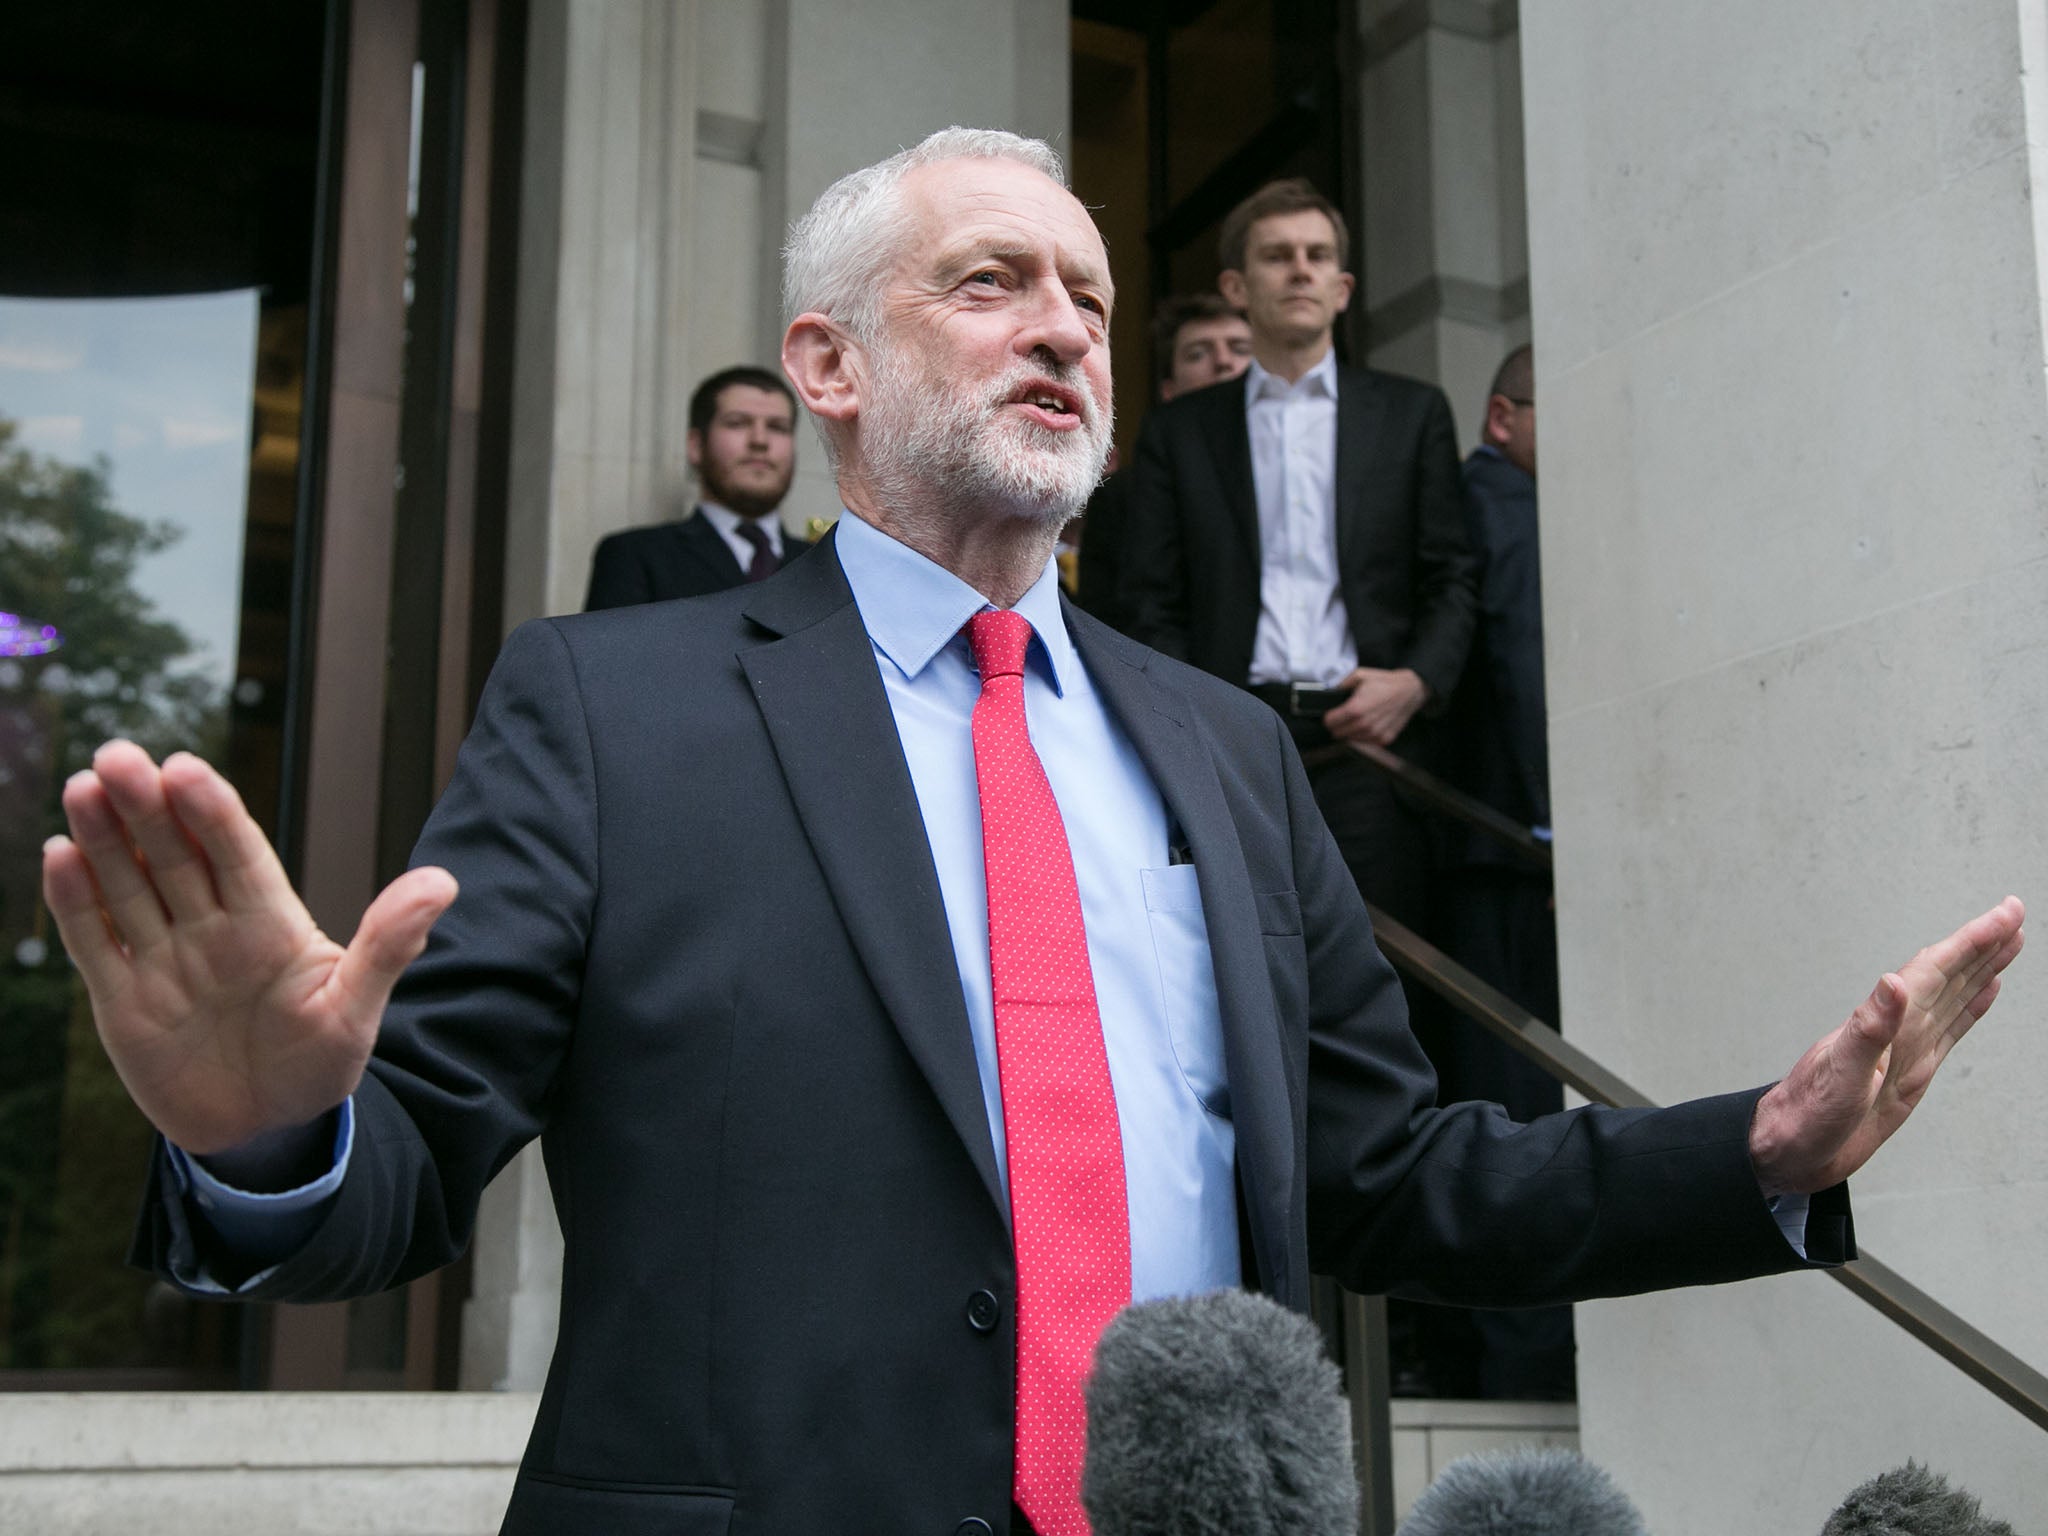 Jeremy Corbyn claimed the party's manifesto would be 'very popular' with voters